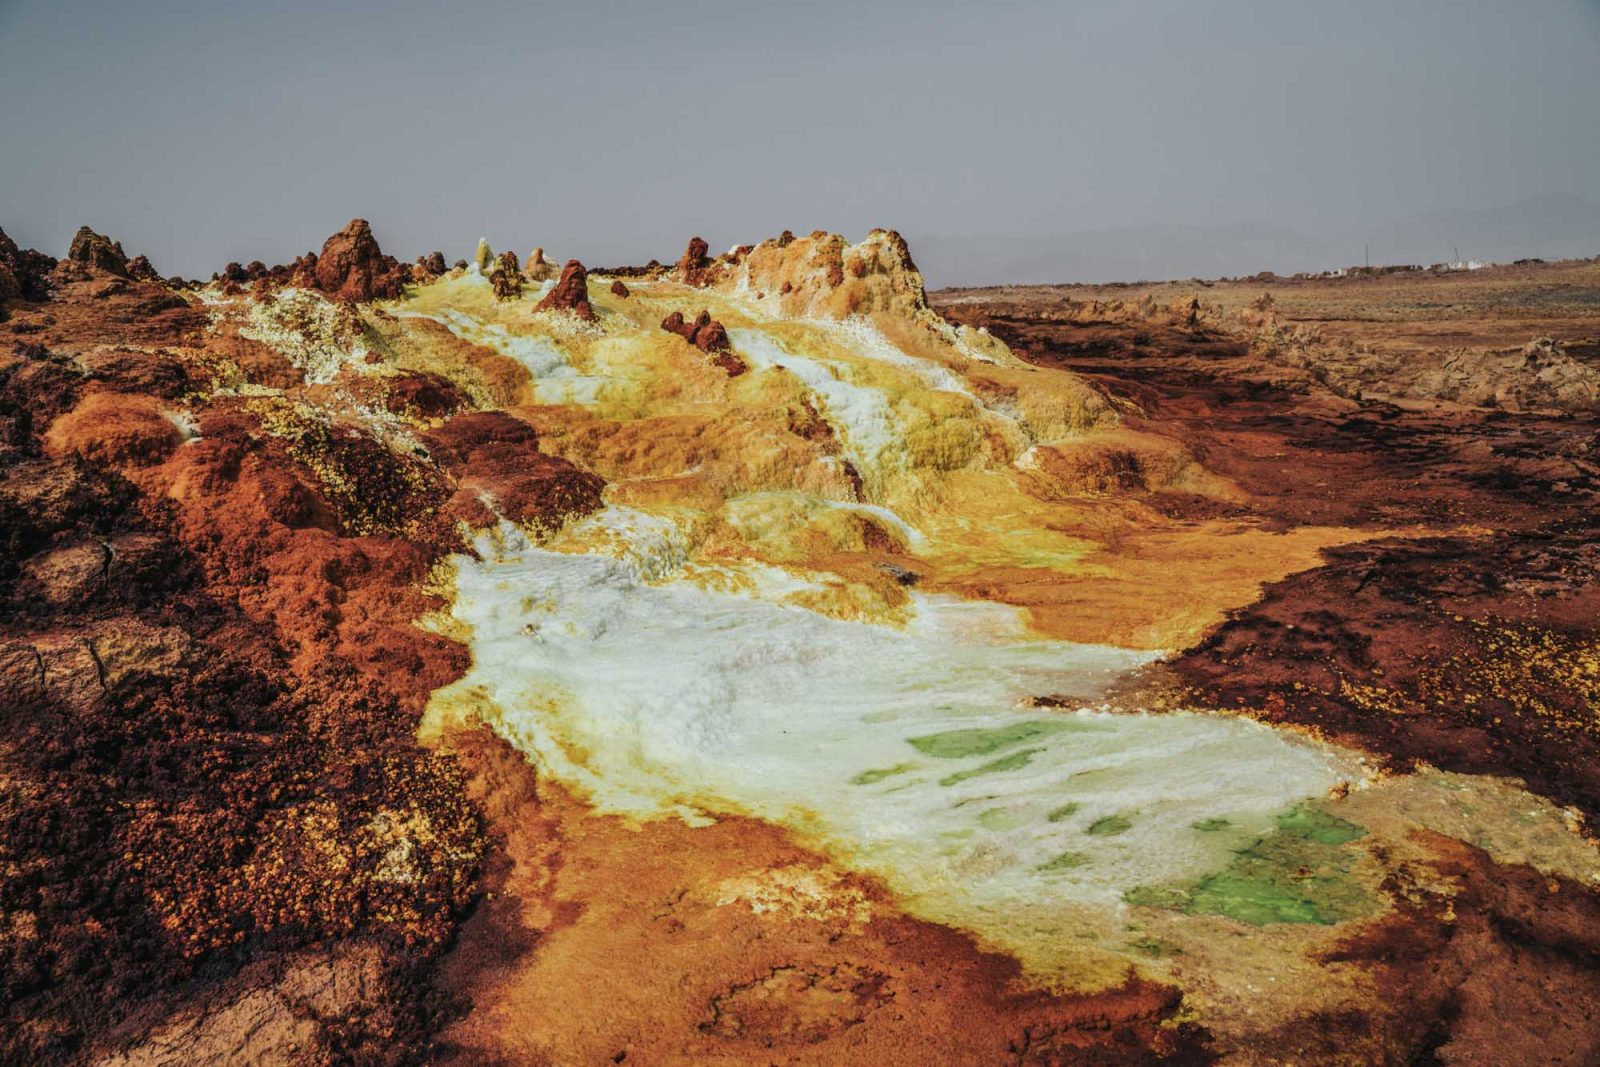 Visiting the Hottest Place on Earth: Our Day Trip to the Danakil Depression